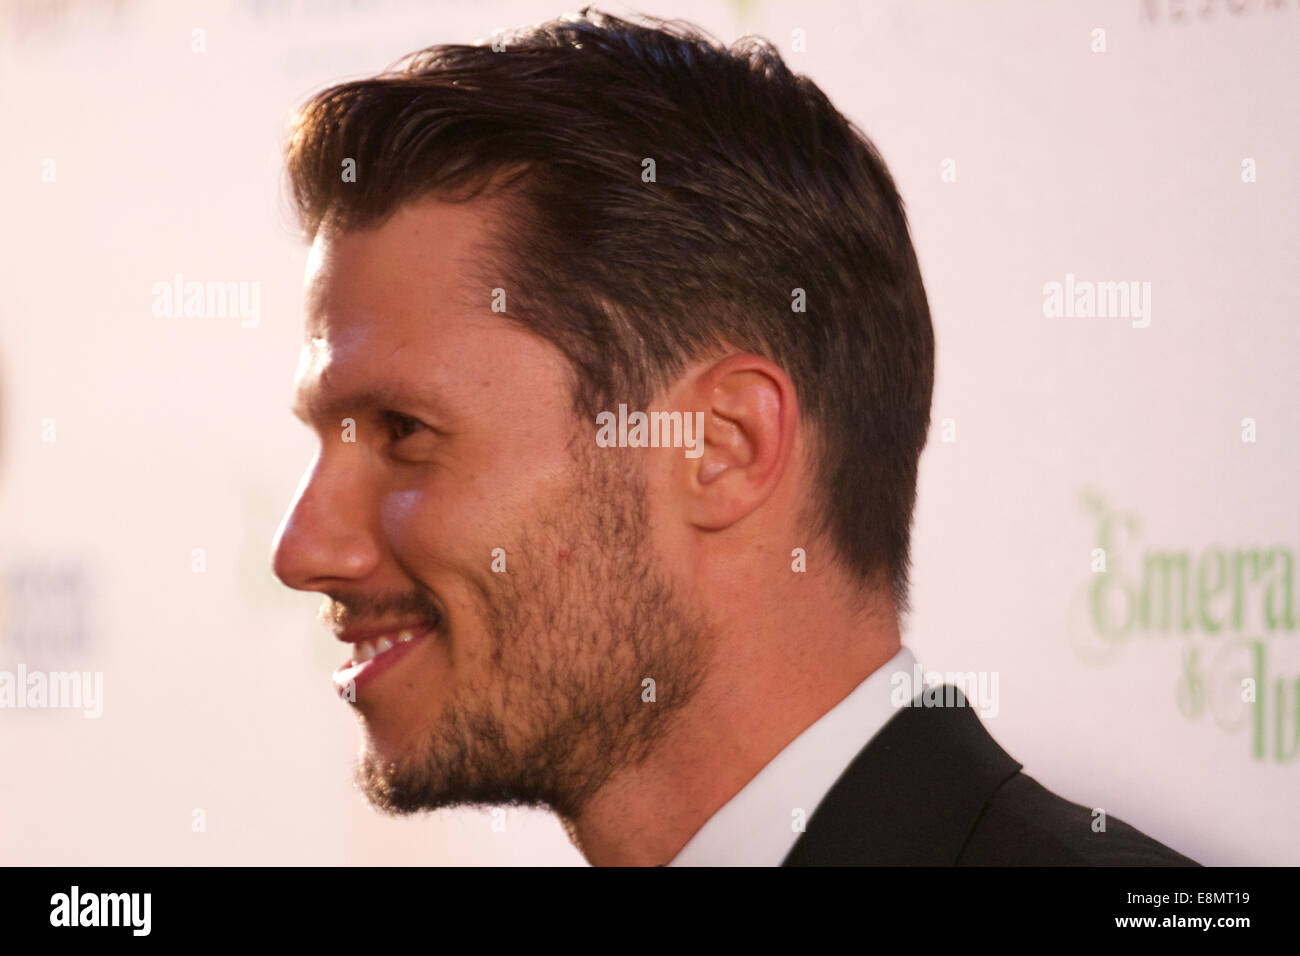 Sydney Town Hall, 483 George Street, Sydney, NSW, Australia. 10 October 2014. Pictured is Model Jason Dundas. Pop superstar Ronan Keating hosted the Emeralds & Ivy Ball to raise money for Cancer Council Australia. Copyright Credit:  2014 Richard Milnes/Alamy Live News. Stock Photo